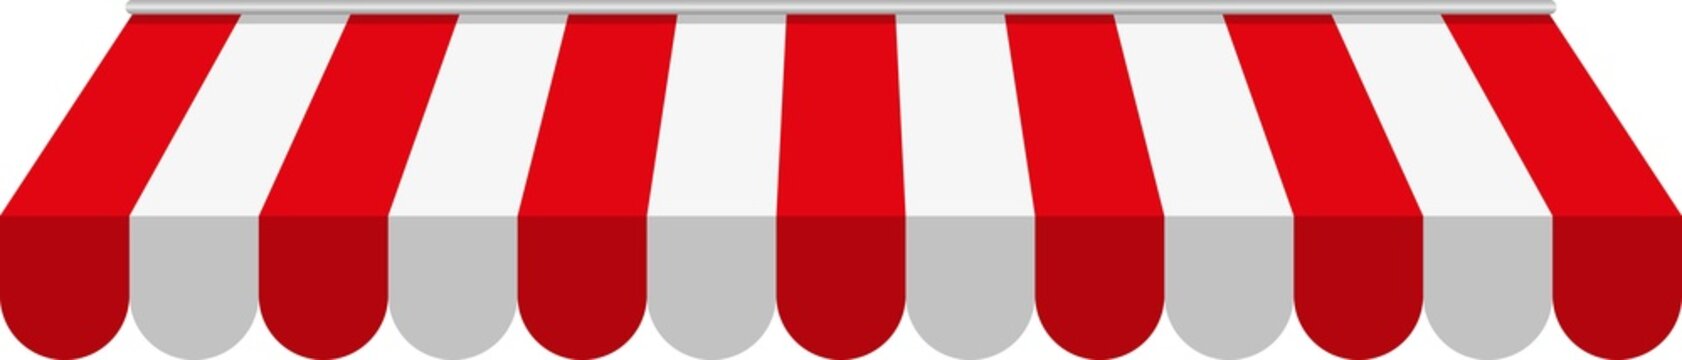 Red and white striped awning canopy for shop, cafe and street restaurant, png isolated on transparent background.